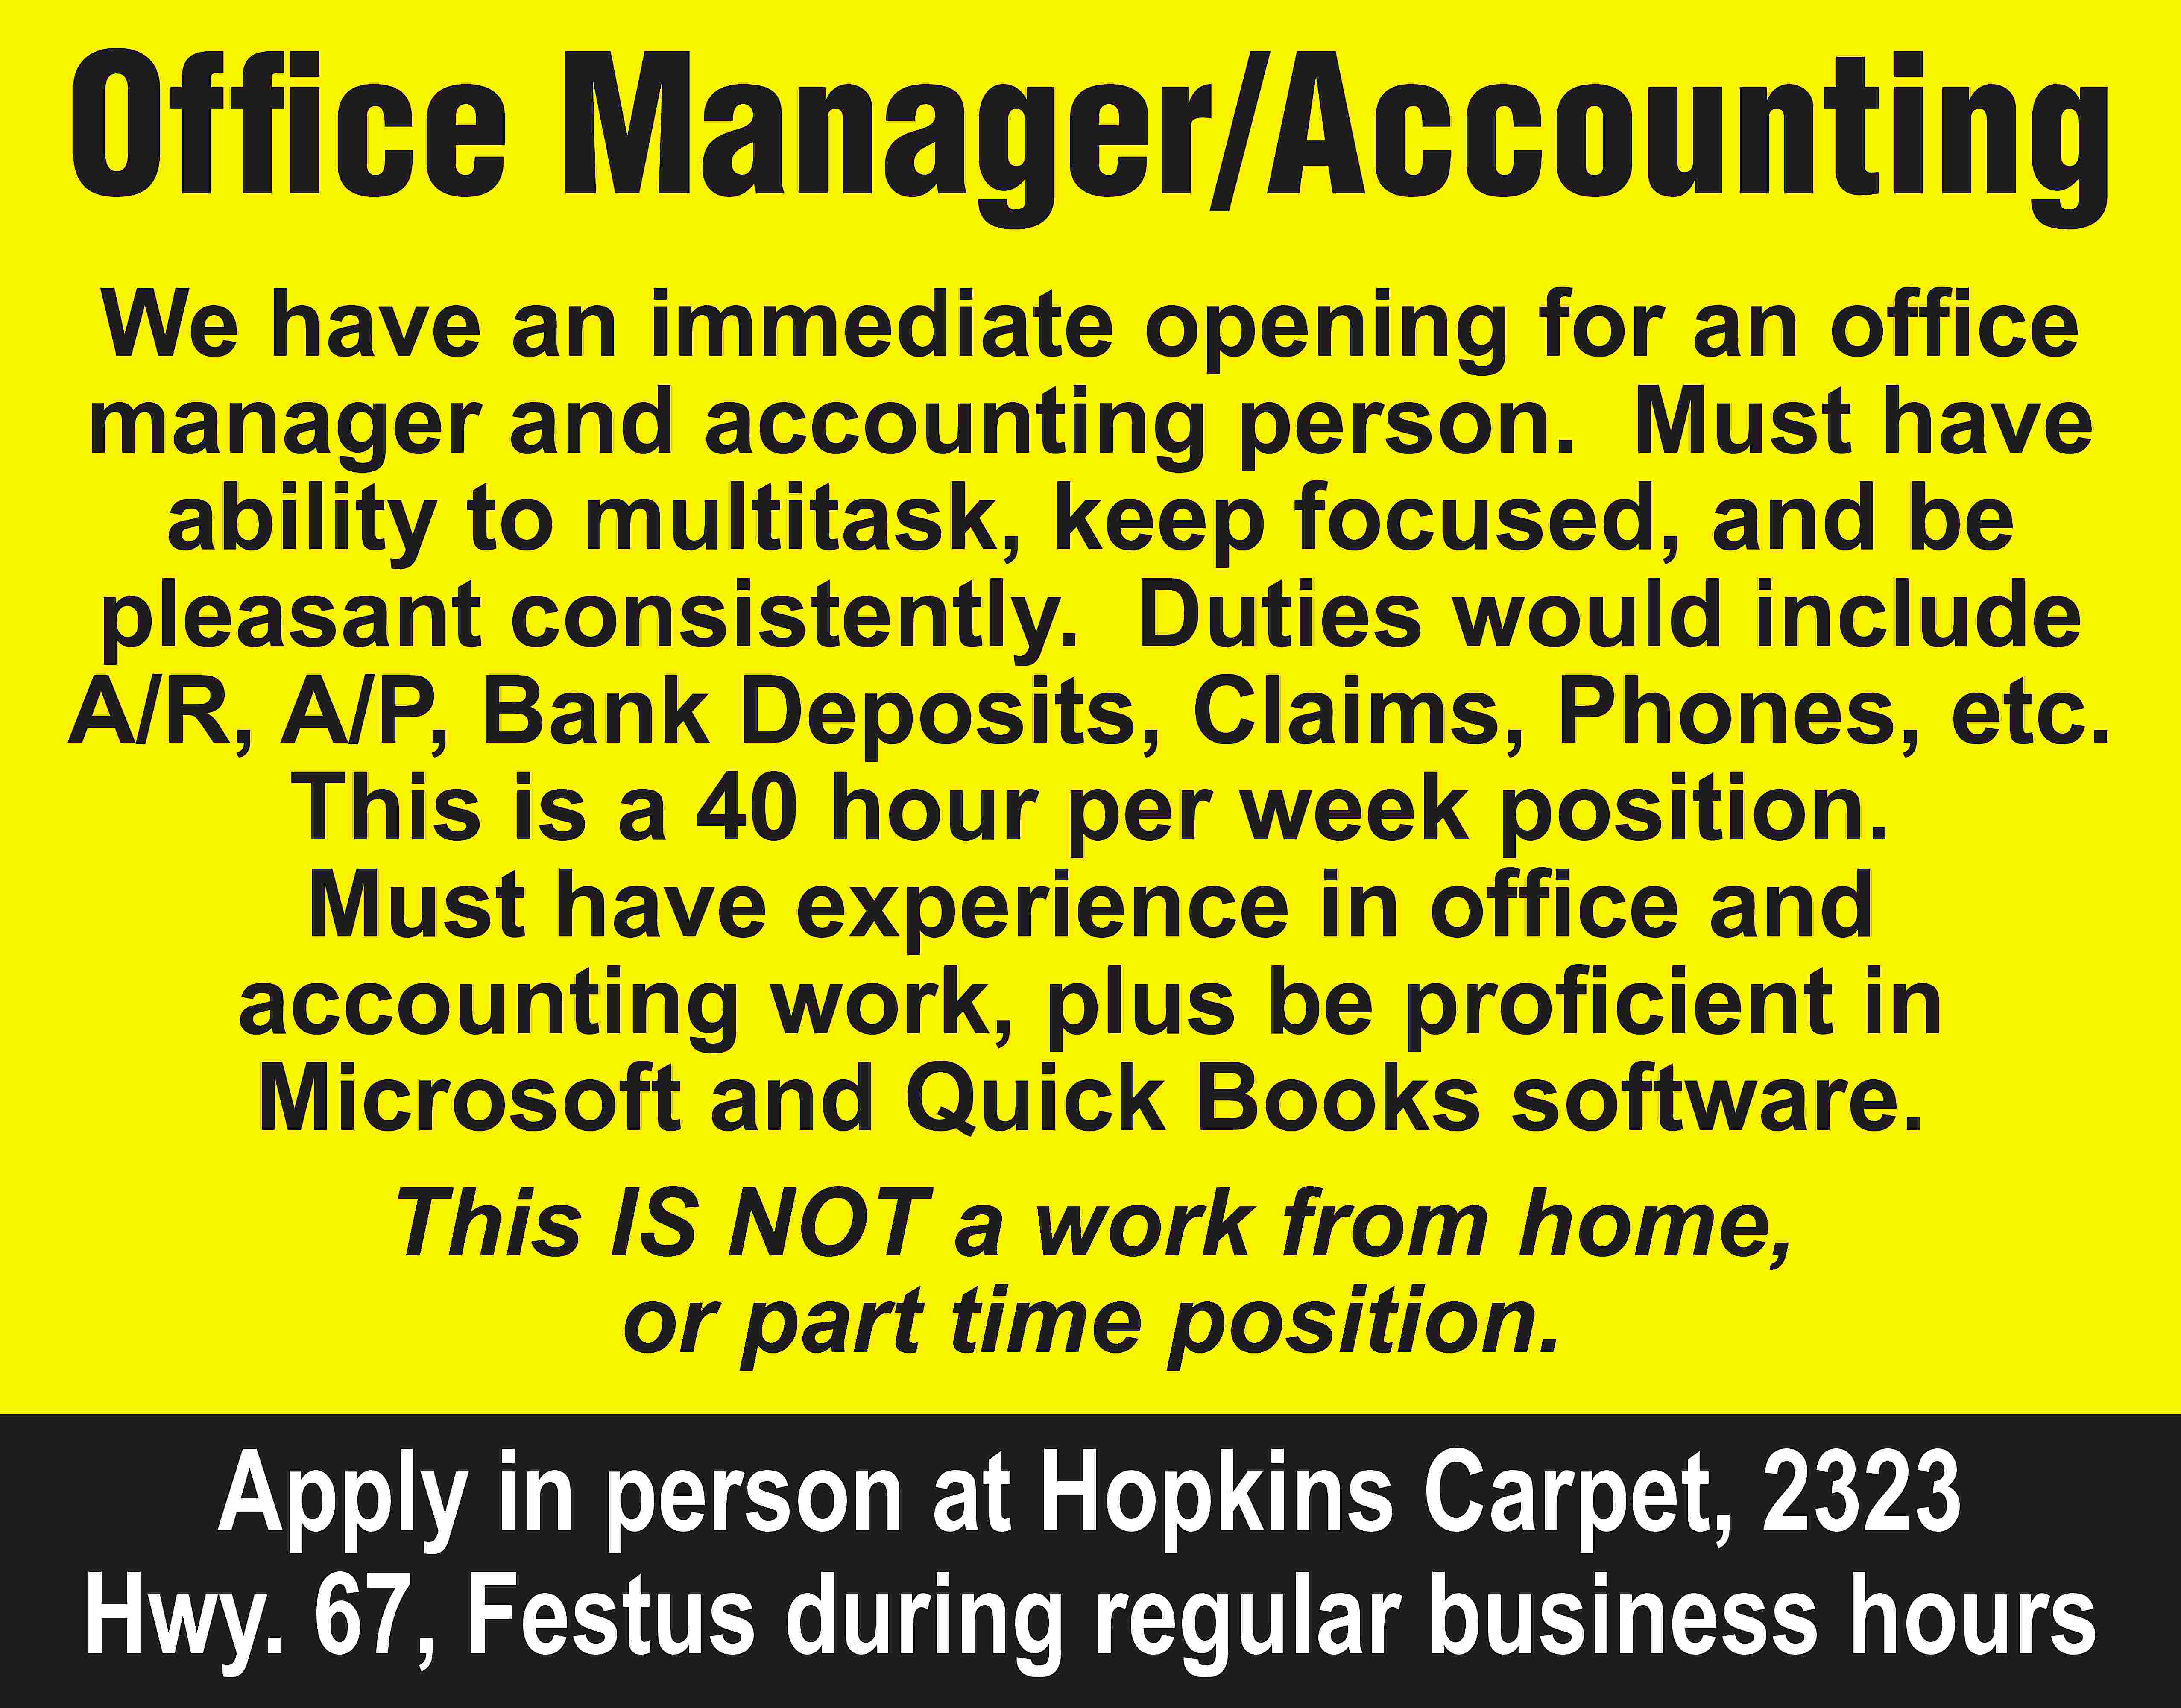 Office Manager/Accounting We have an  Office Manager/Accounting We have an immediate opening for an office manager and accounting person. Must have ability to multitask, keep focused, and be pleasant consistently. Duties would include A/R, A/P, Bank Deposits, Claims, Phones, etc. This is a 40 hour per week position. Must have experience in office and accounting work, plus be proficient in Microsoft and Quick Books software. This IS NOT a work from home, or part time position. Apply in person at Hopkins Carpet, 2323 Hwy. 67, Festus during regular business hours